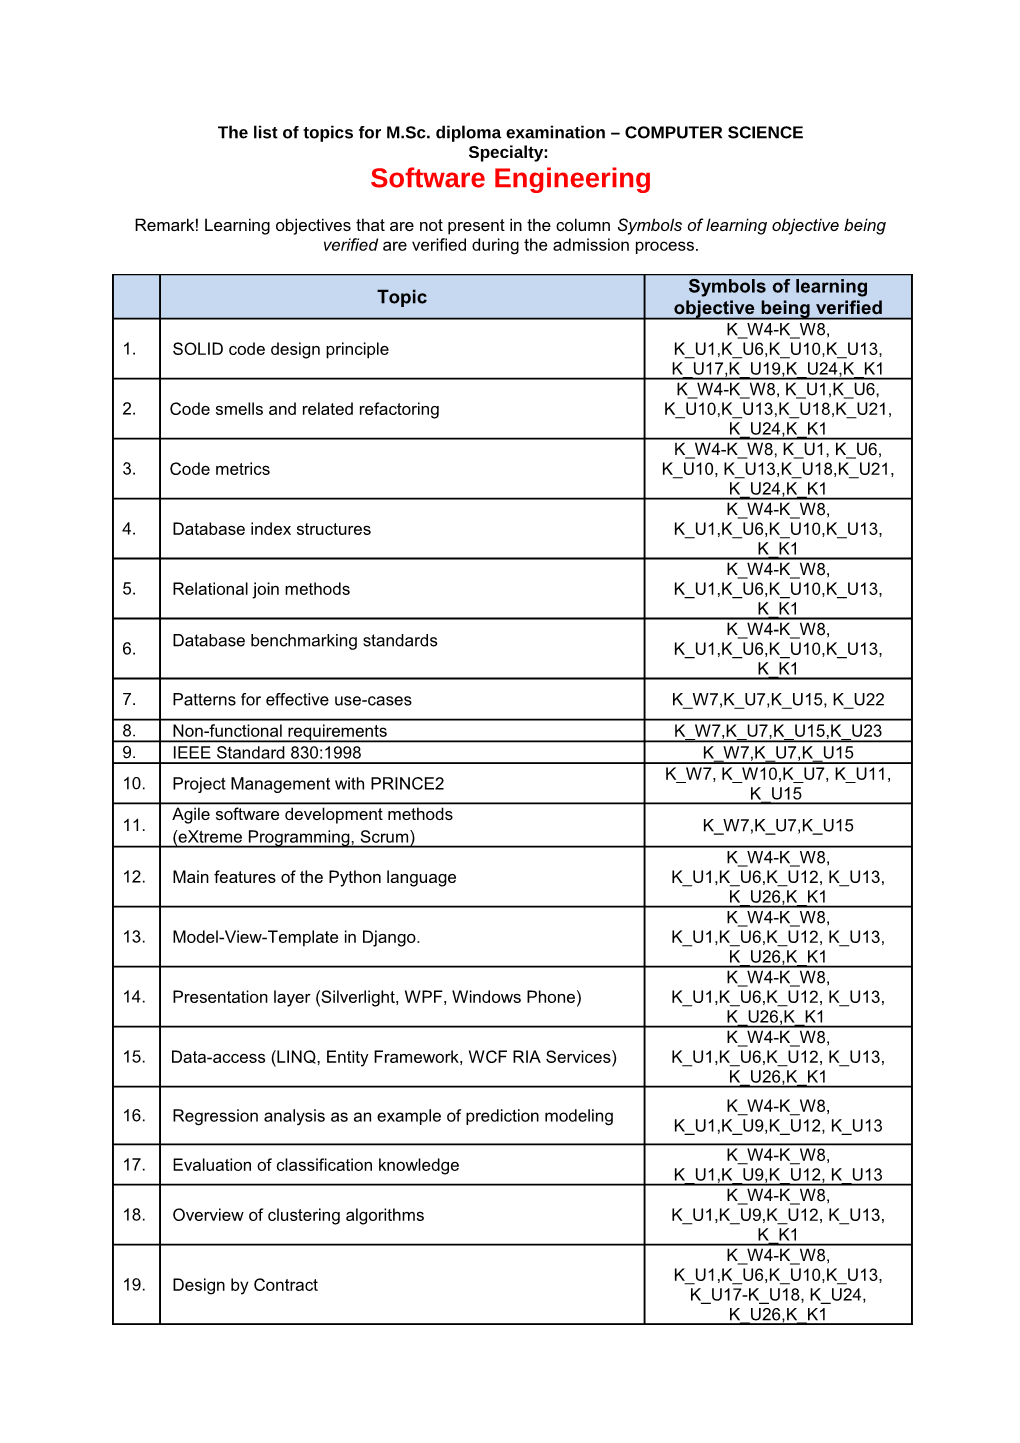 The List of Topics for M.Sc. Diploma Examination COMPUTER SCIENCE